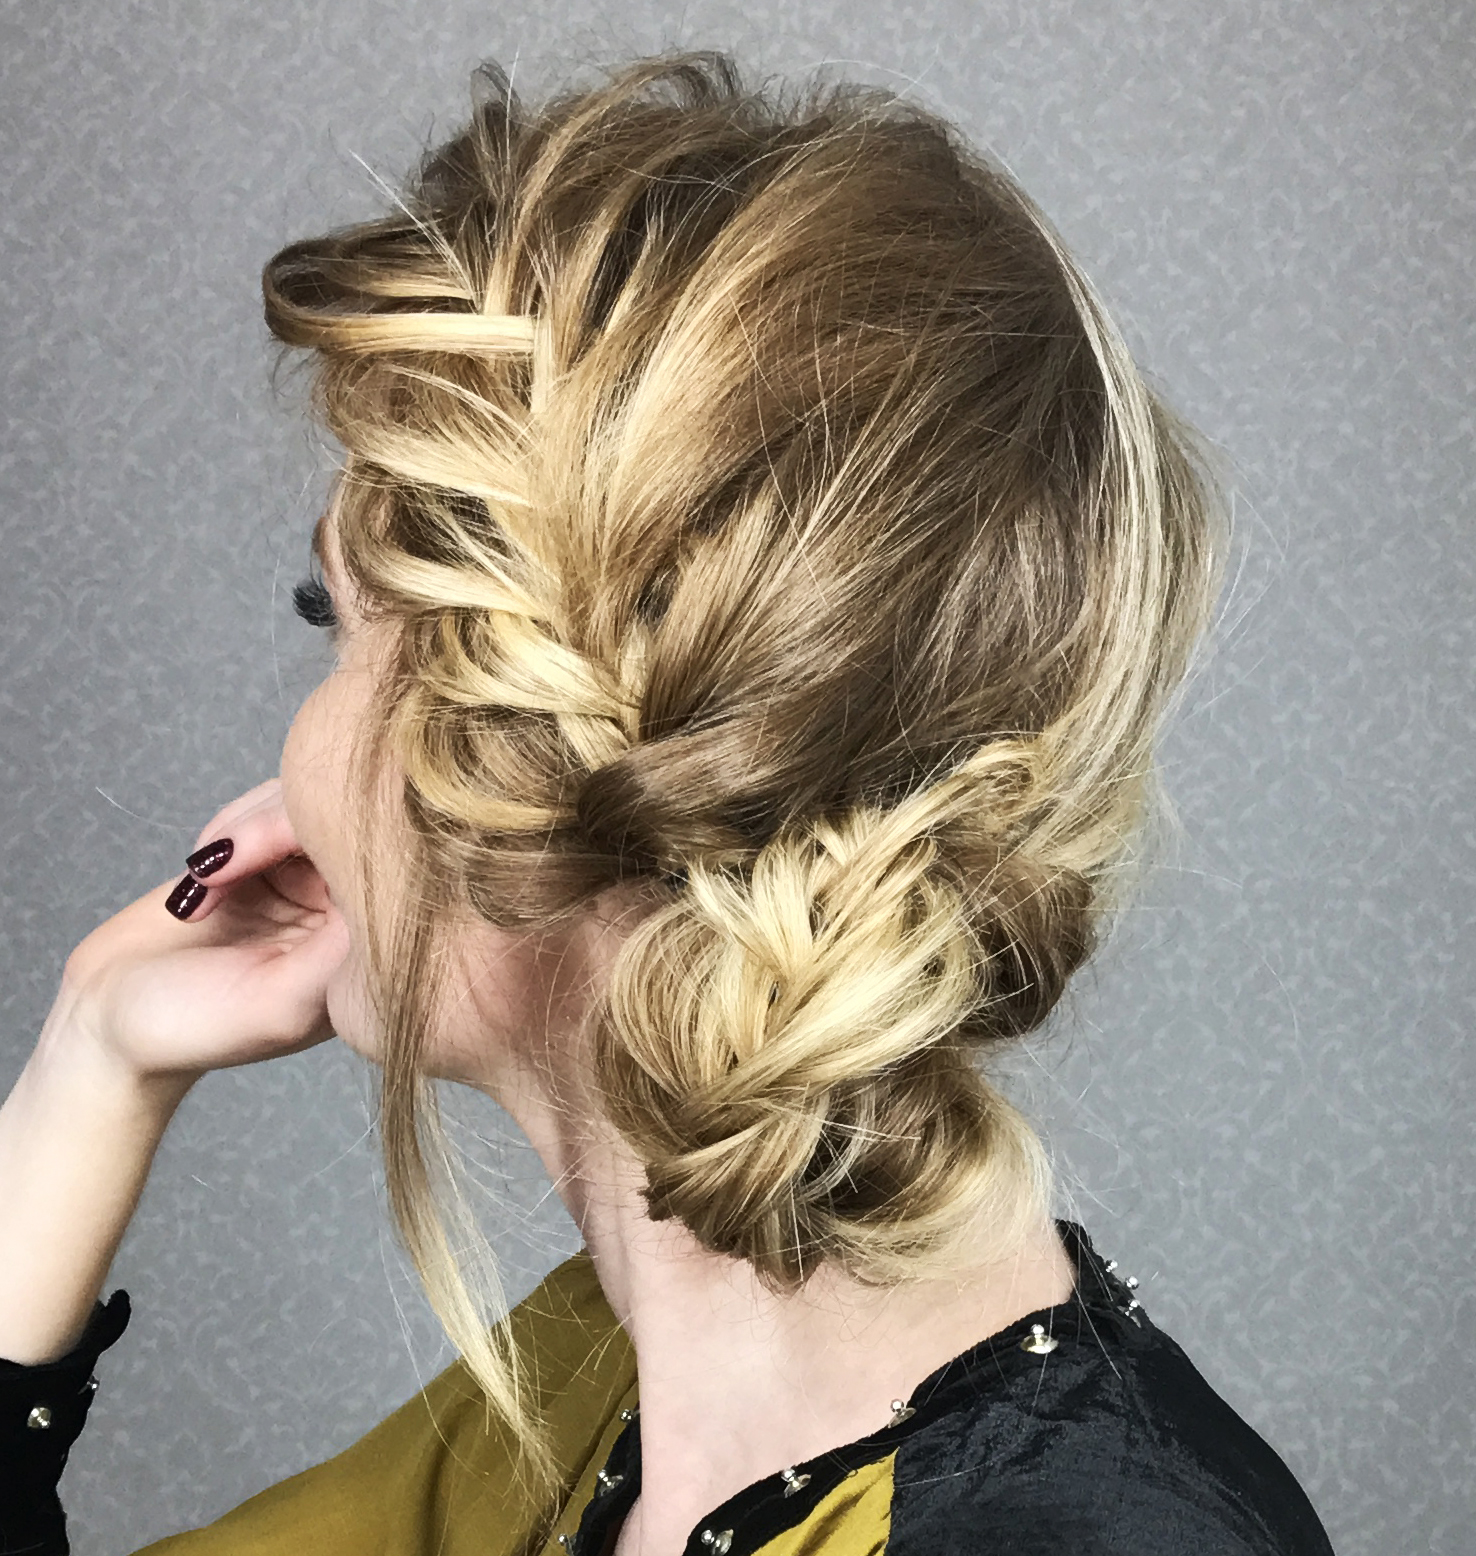 Braided Updo With A Low Bun